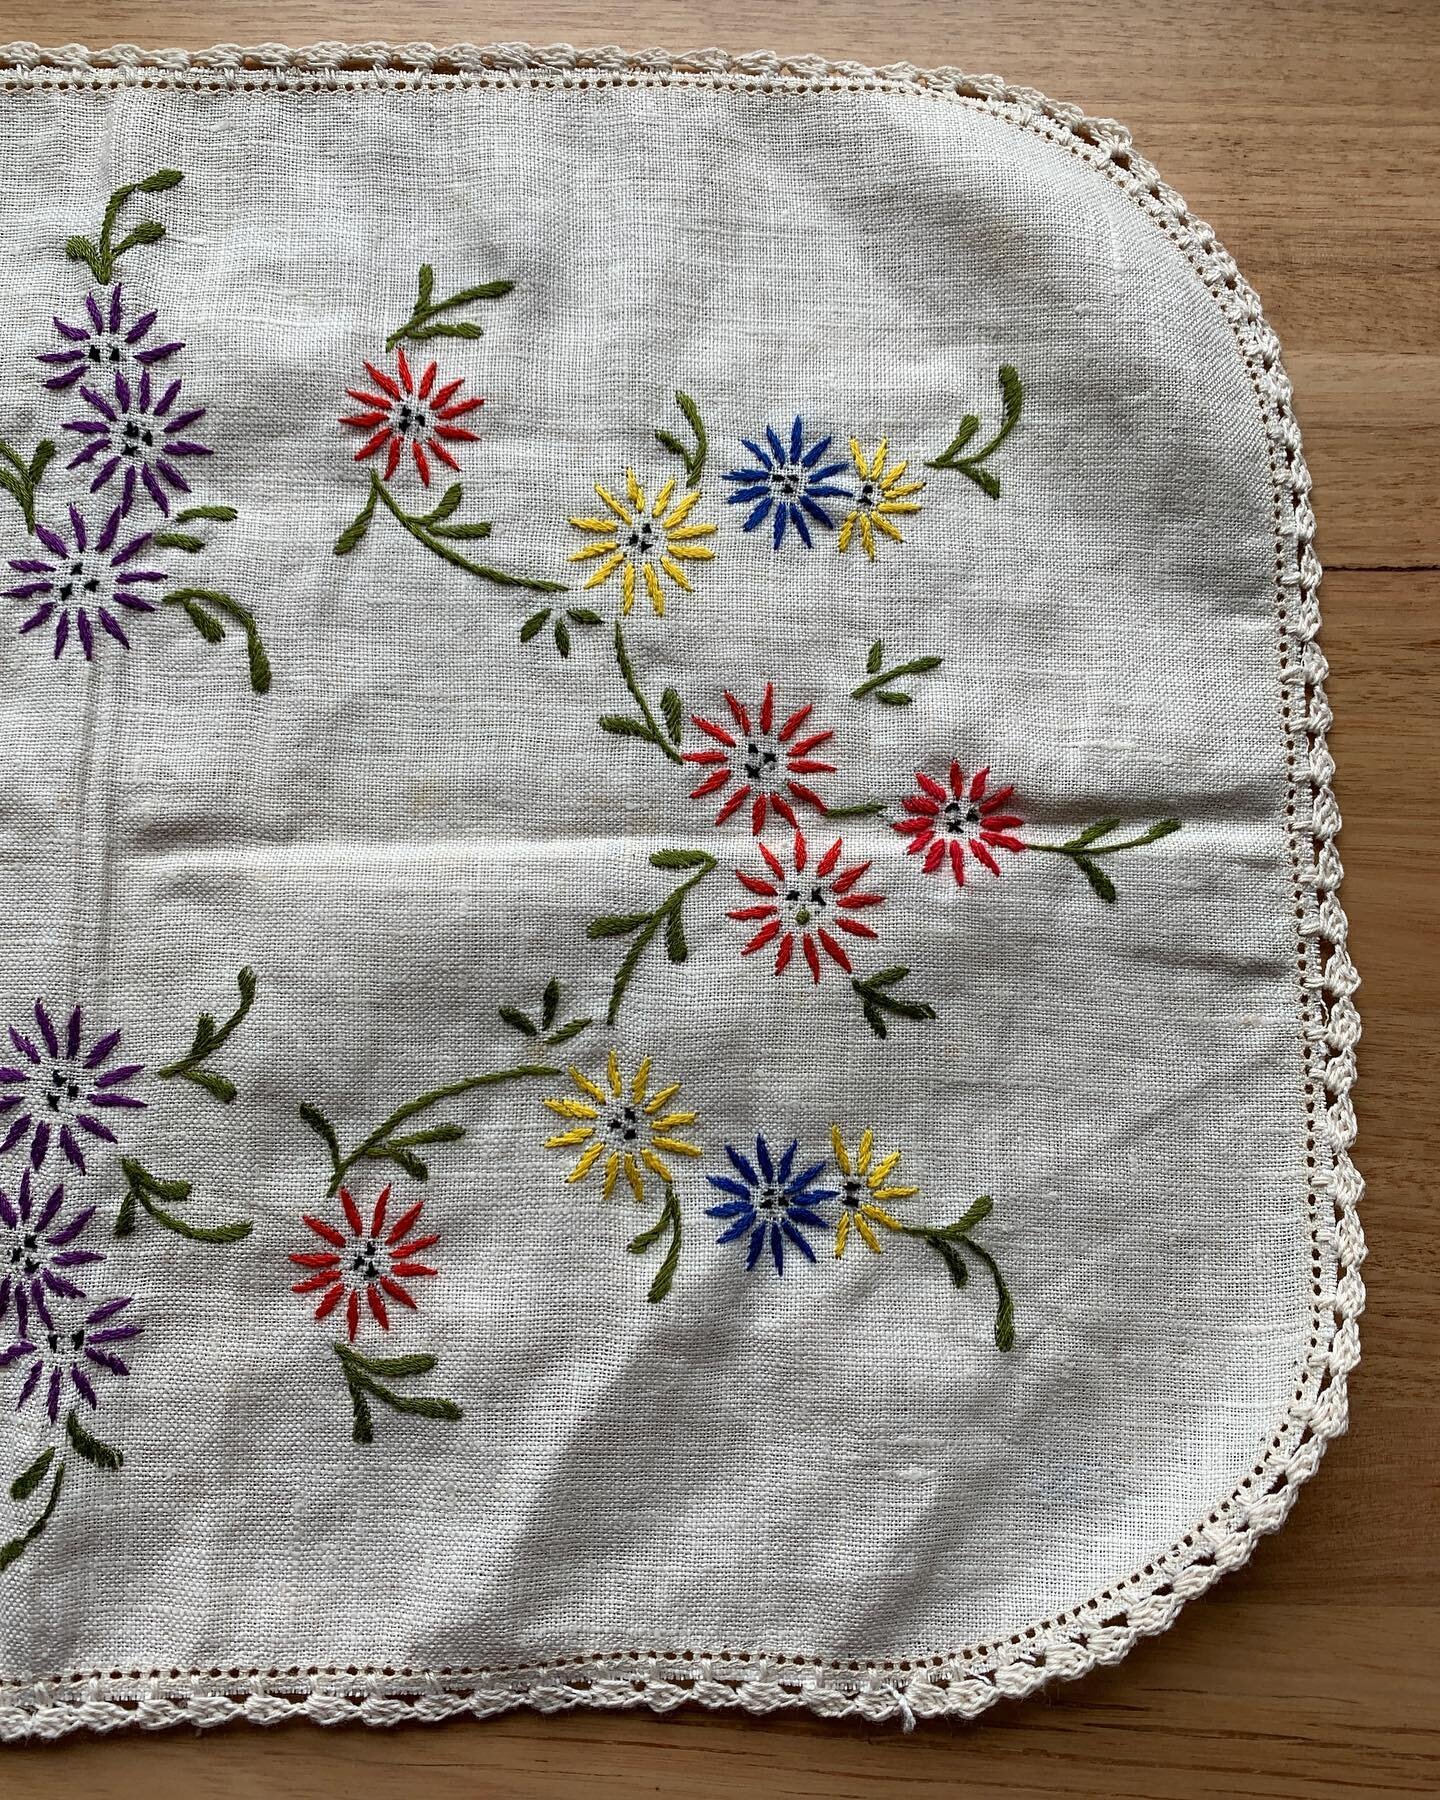 Curved edged table mat with intricate red, blue, yellow and purple flowers. 

All hand embroidered. 

Measures 470 x 280mm.

$20 + postage.

To purchase an item, please comment below or send us a DM. 

***

We will be posting items to purchase over t